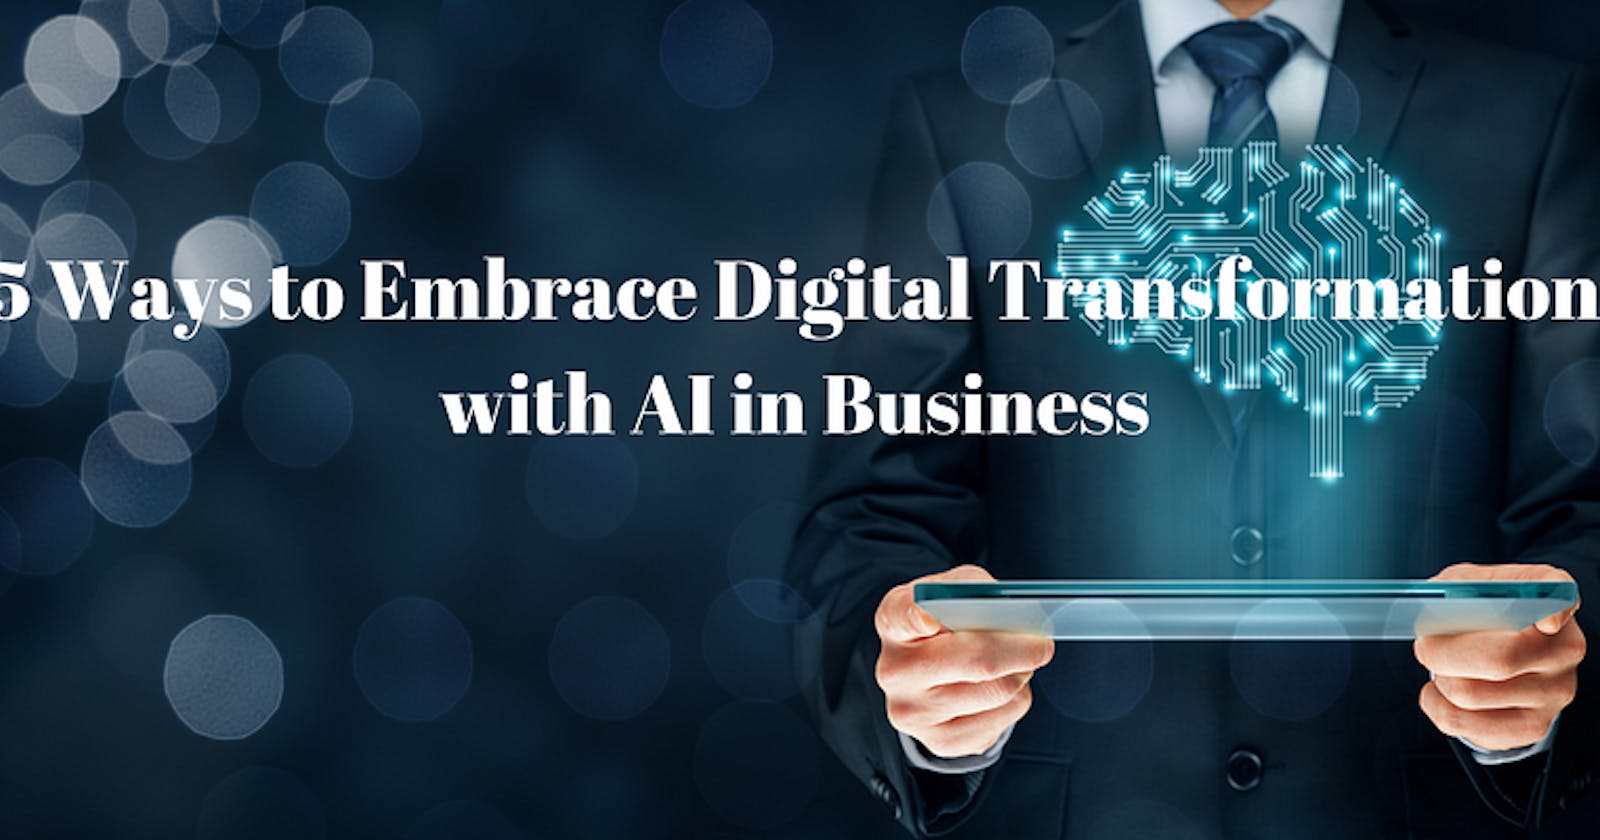 5 Ways to Embrace Digital Transformation with AI in Business